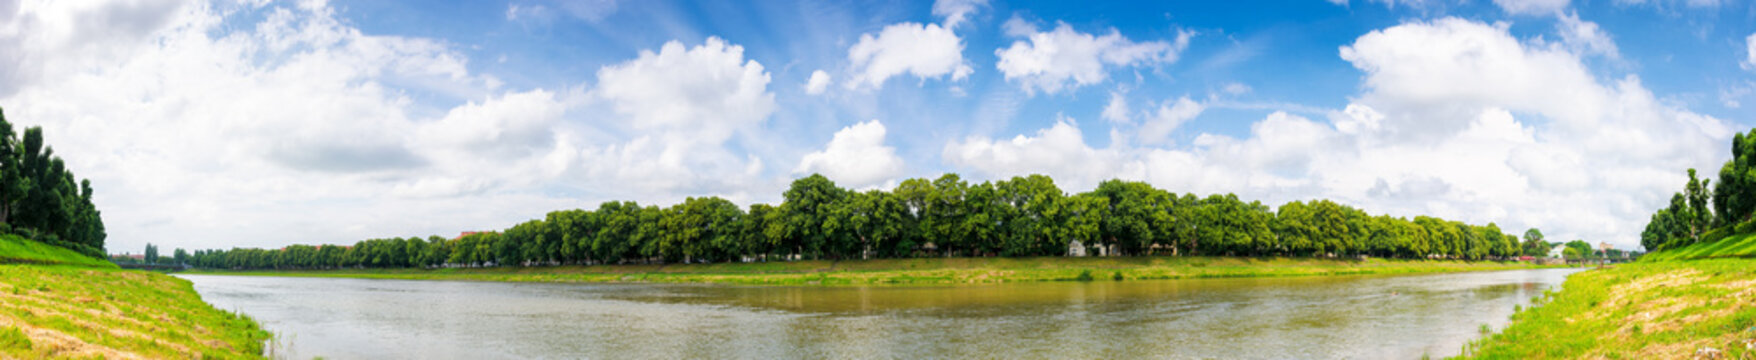 panorama of the river uzh in summer. longest linden alley in europe beneath a gorgeous sky with clouds on a sunny day. popular tourist attraction of uzhhorod in ukraine